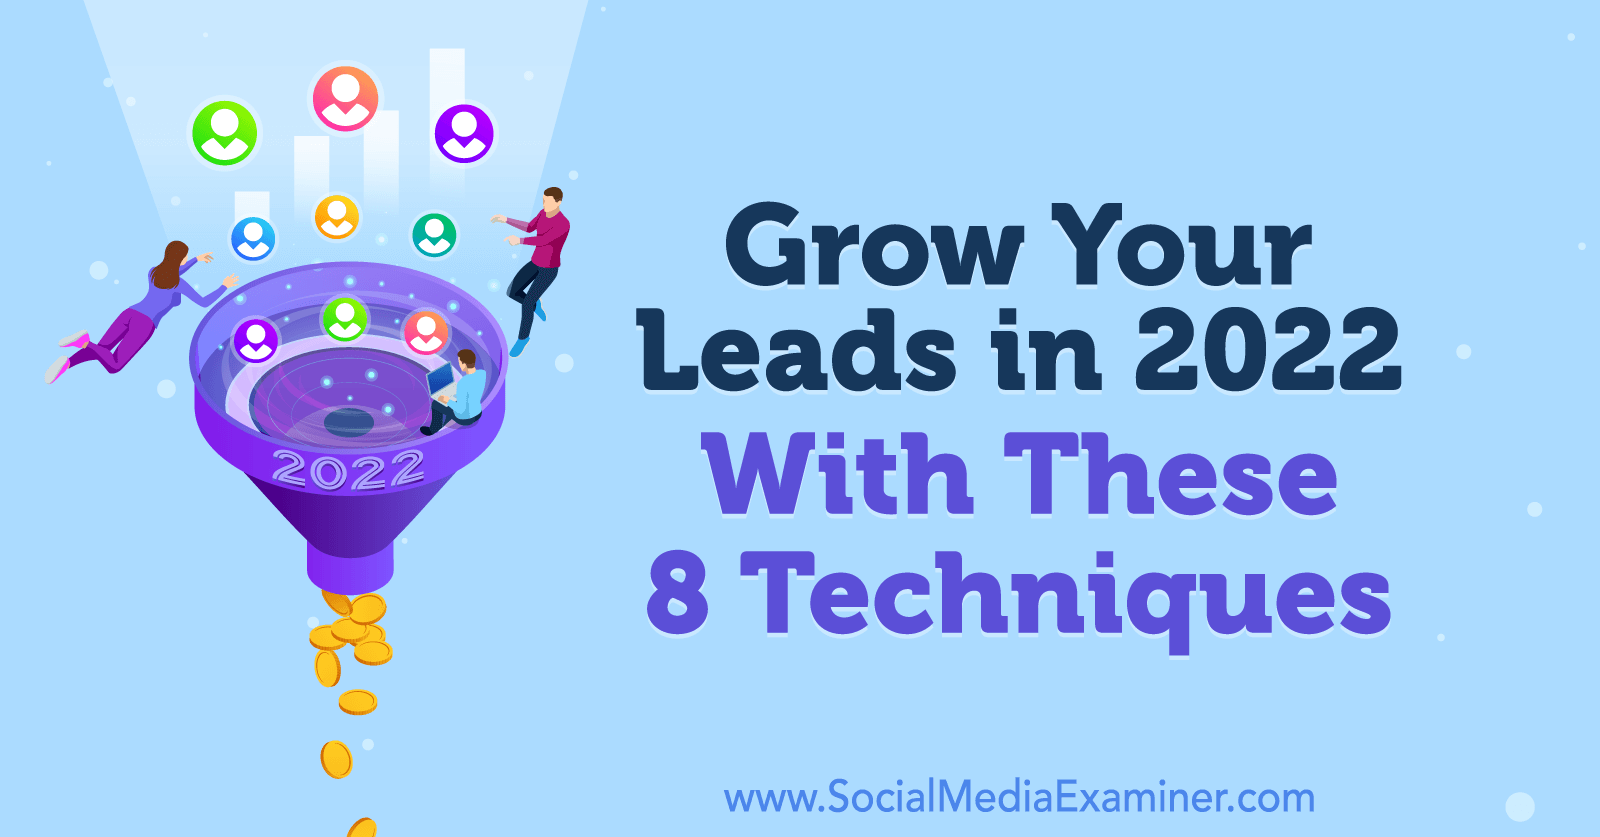 Grow Your Leads in 2022 With These 8 Techniques by Anna Sonnenberg